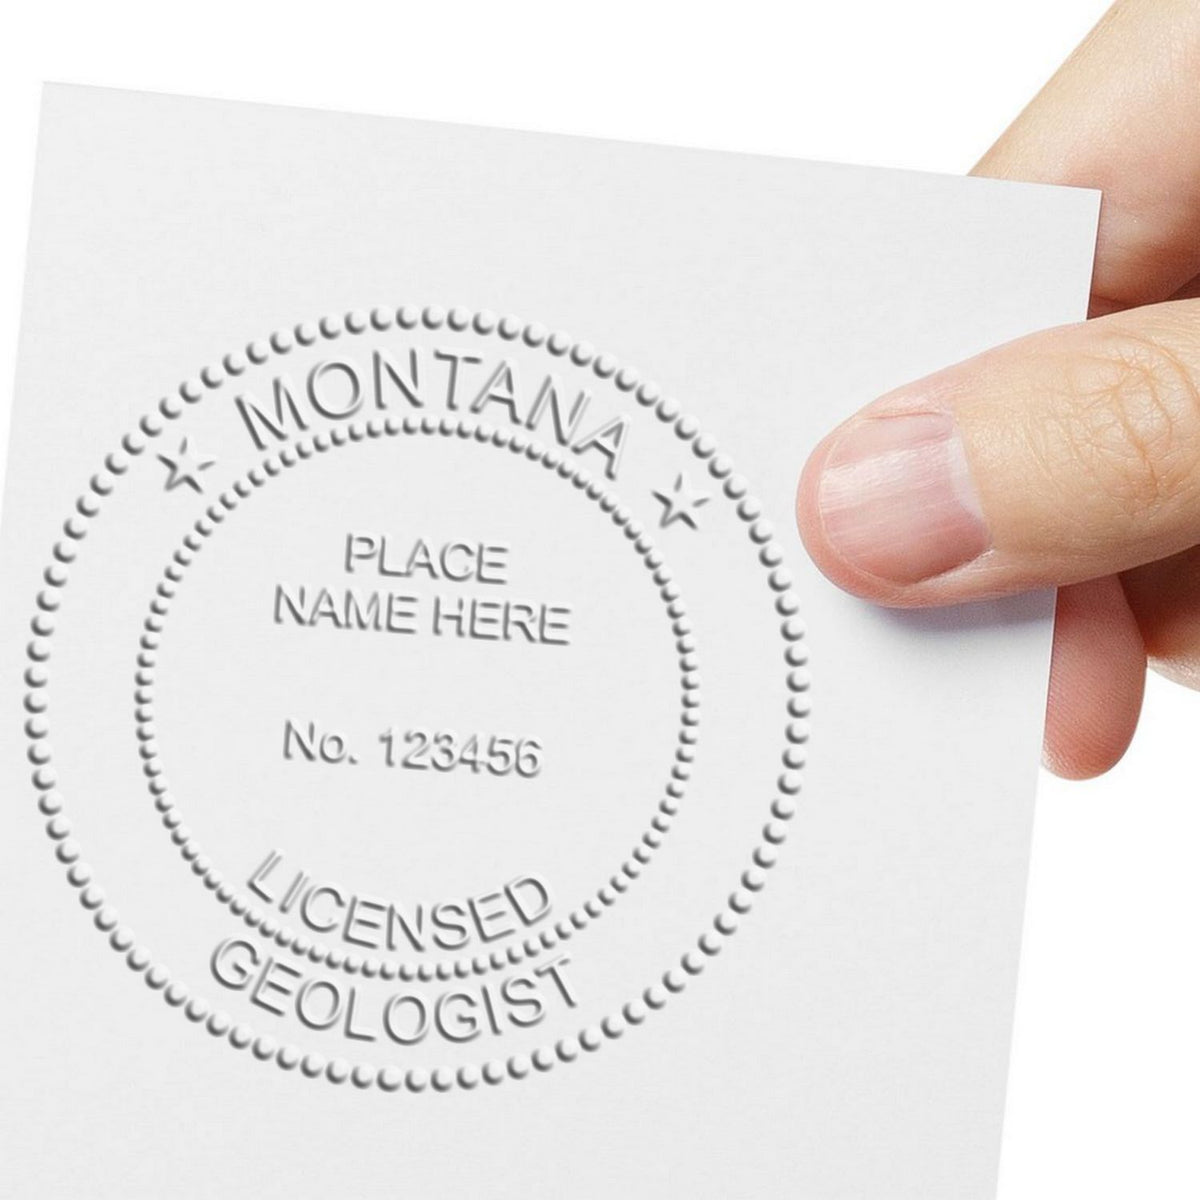 A lifestyle photo showing a stamped image of the Handheld Montana Professional Geologist Embosser on a piece of paper